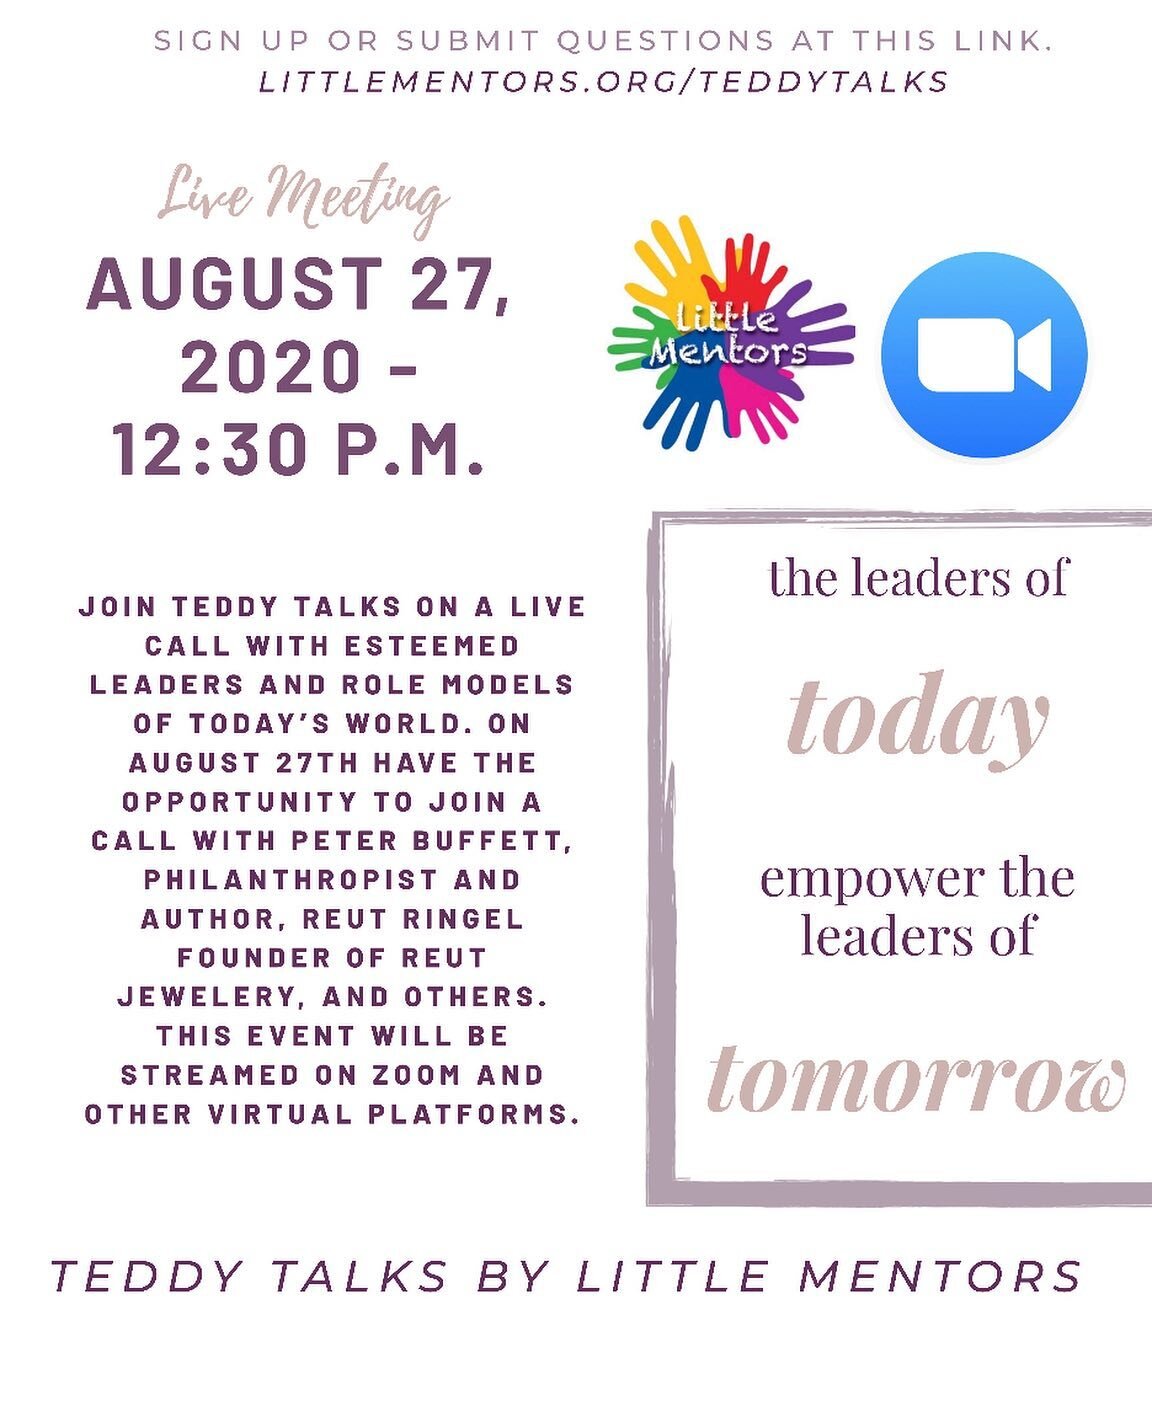 Little Mentors presents their new initiative Teddy Talks! 🧸💕Sign up to watch leaders and role models empower, inspire, and motivate at littlementors.org/teddytalks. Dm us for more information!